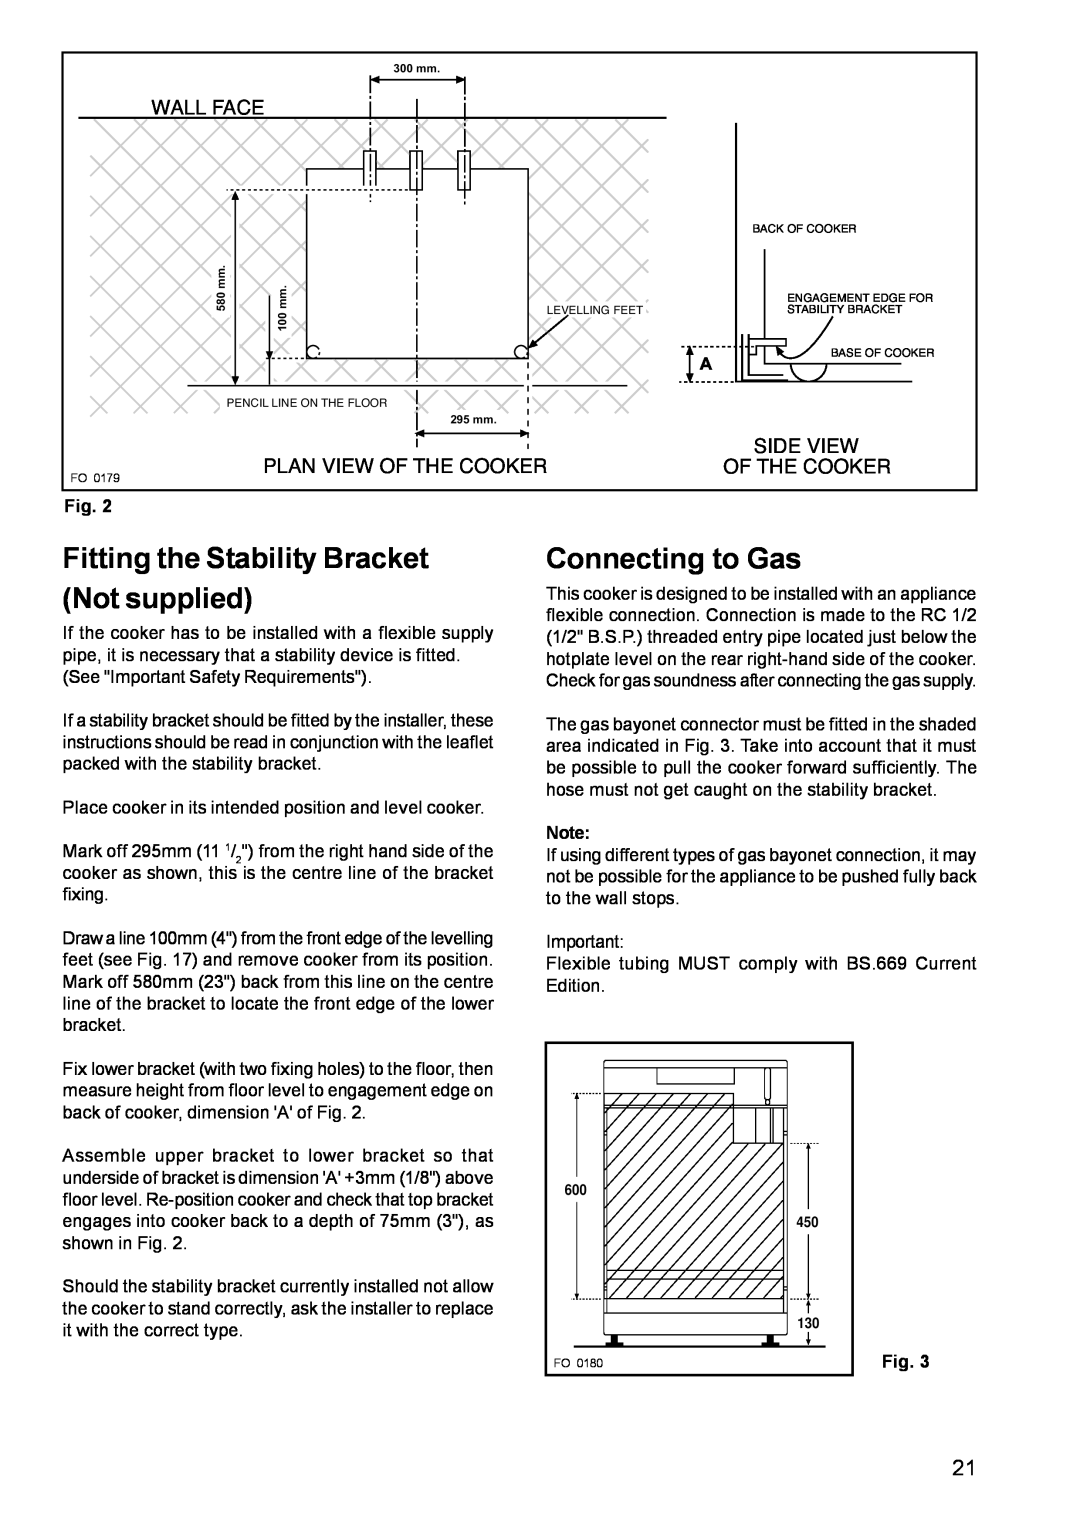 Zanussi ZCM 611 manual Fitting the Stability Bracket Not supplied, Connecting to Gas, Wall Face, Plan View Of The Cooker 